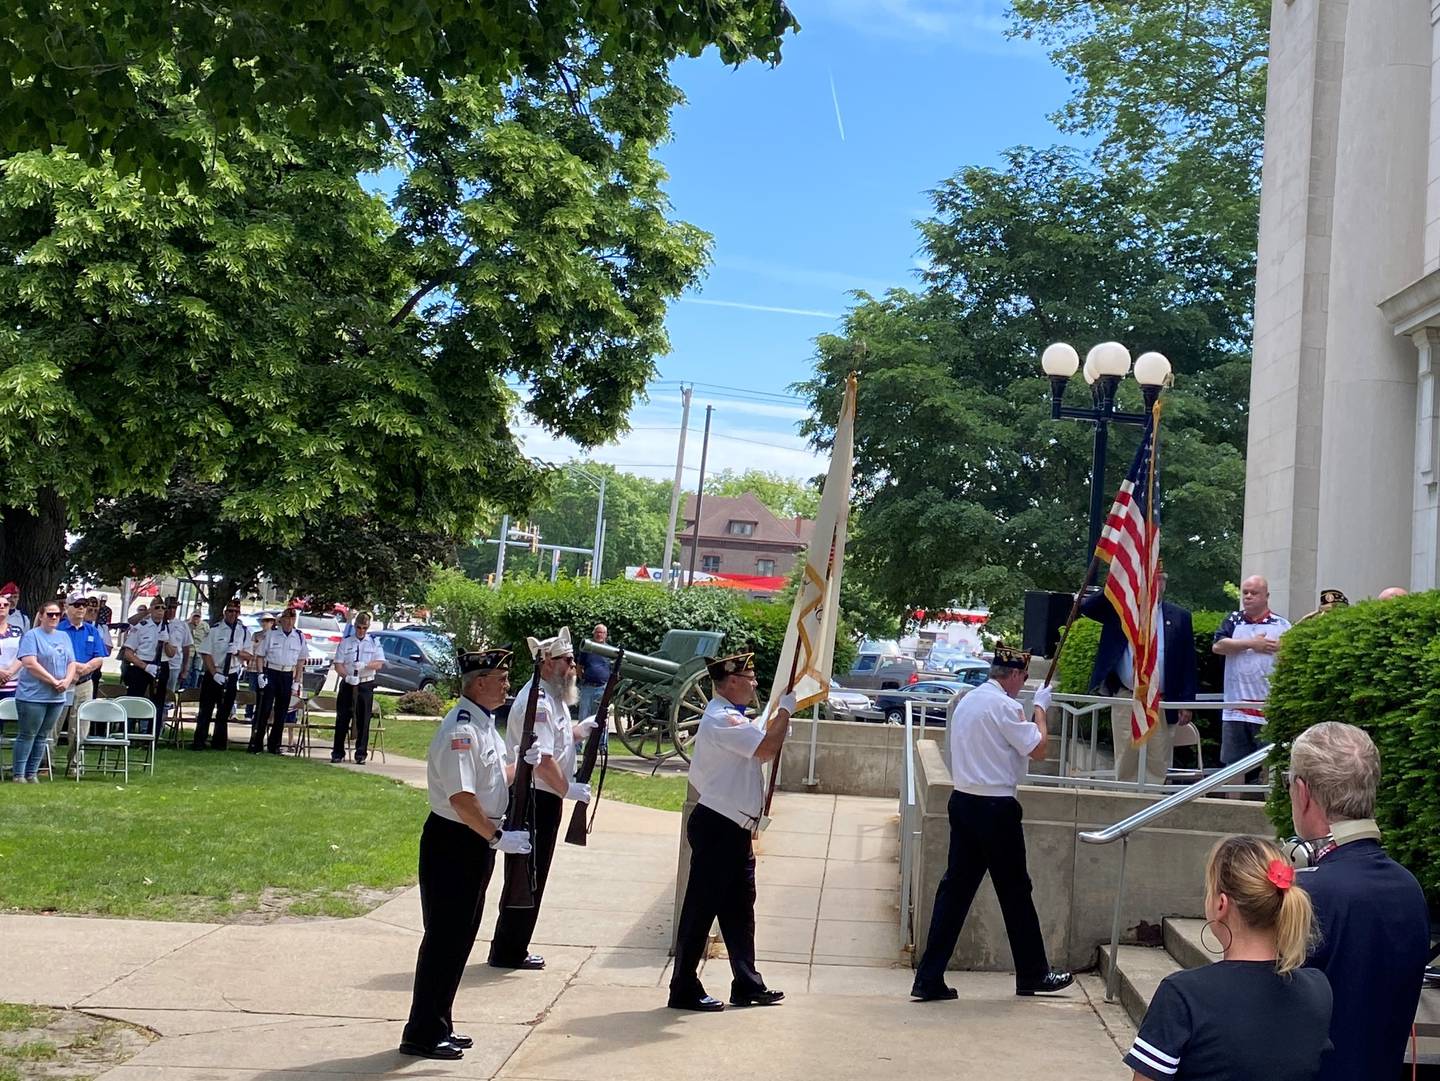 The Morris Color Guard displays the flag Monday morning at the Grundy County Courthouse in Morris.